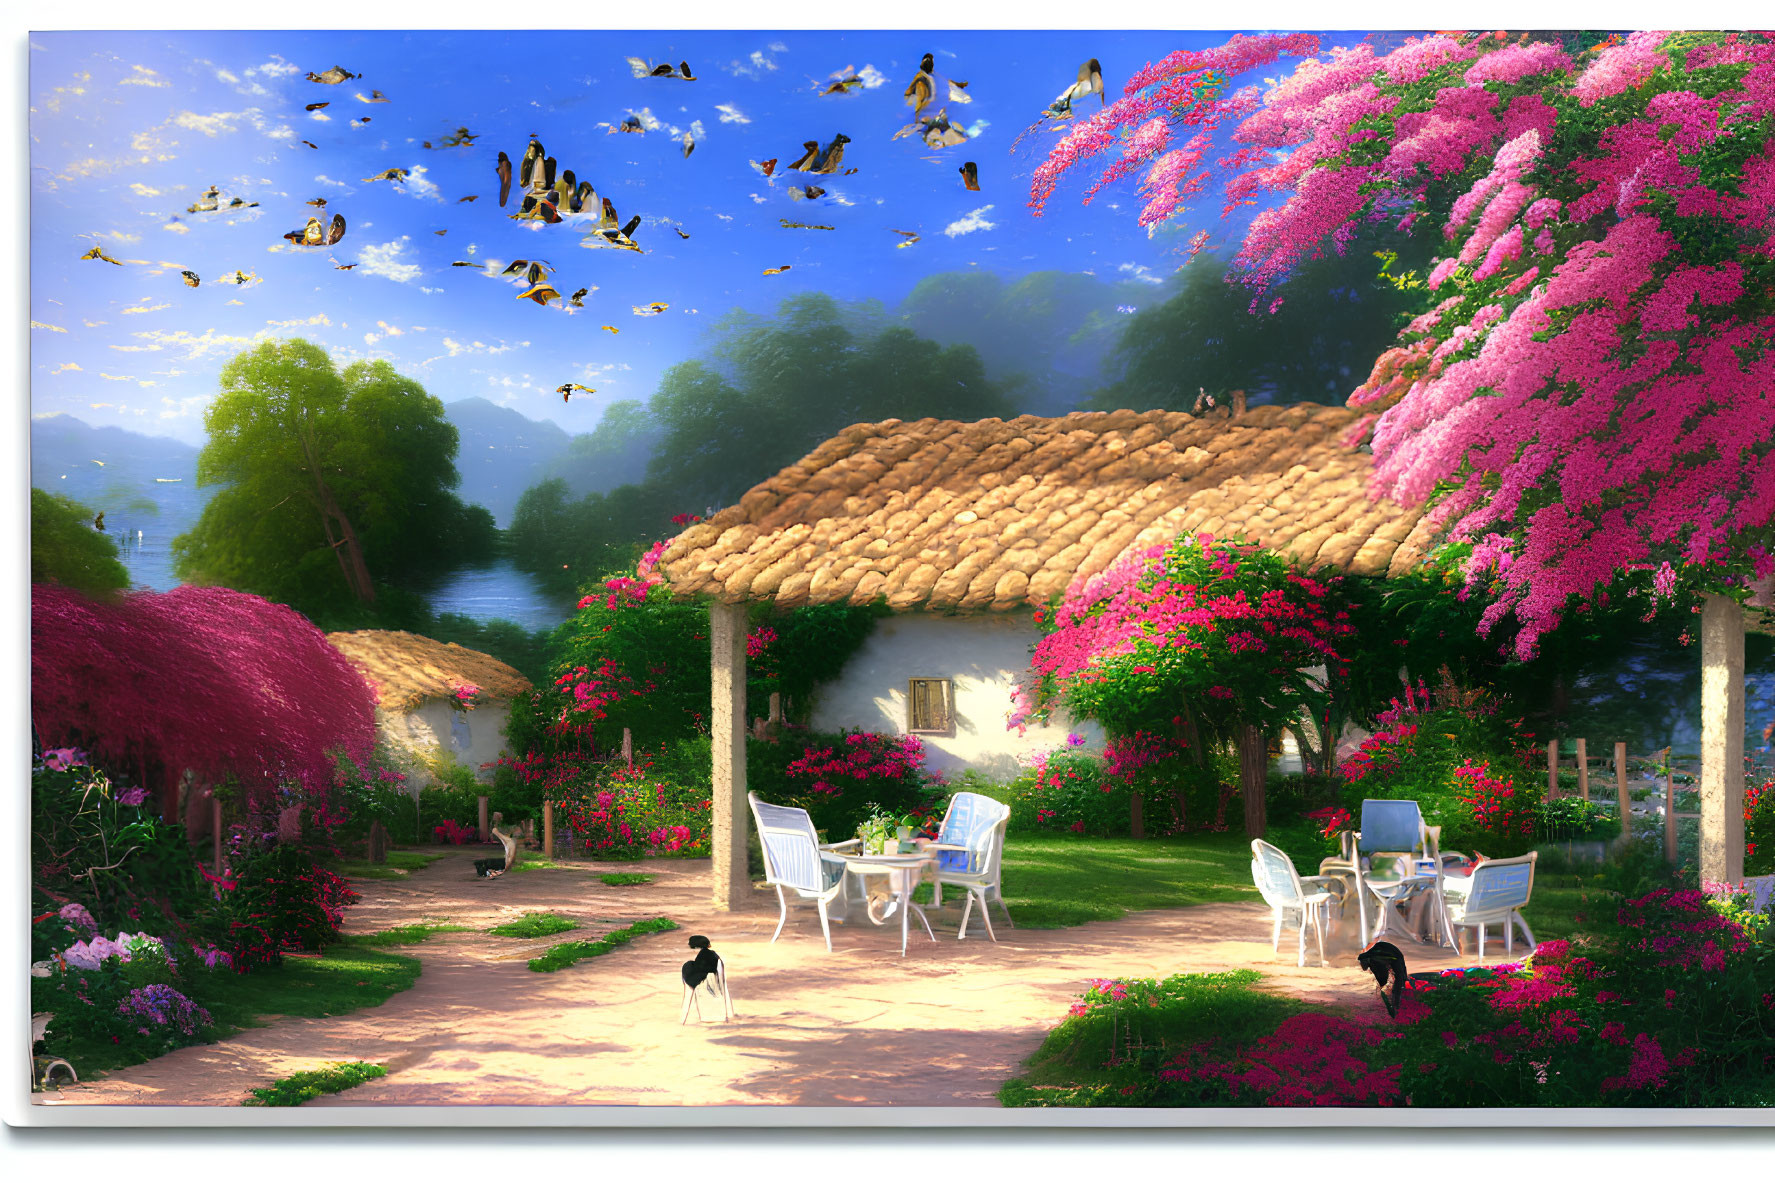 Tranquil garden scene with pink trees, cottage, chairs, dog, birds, and lake